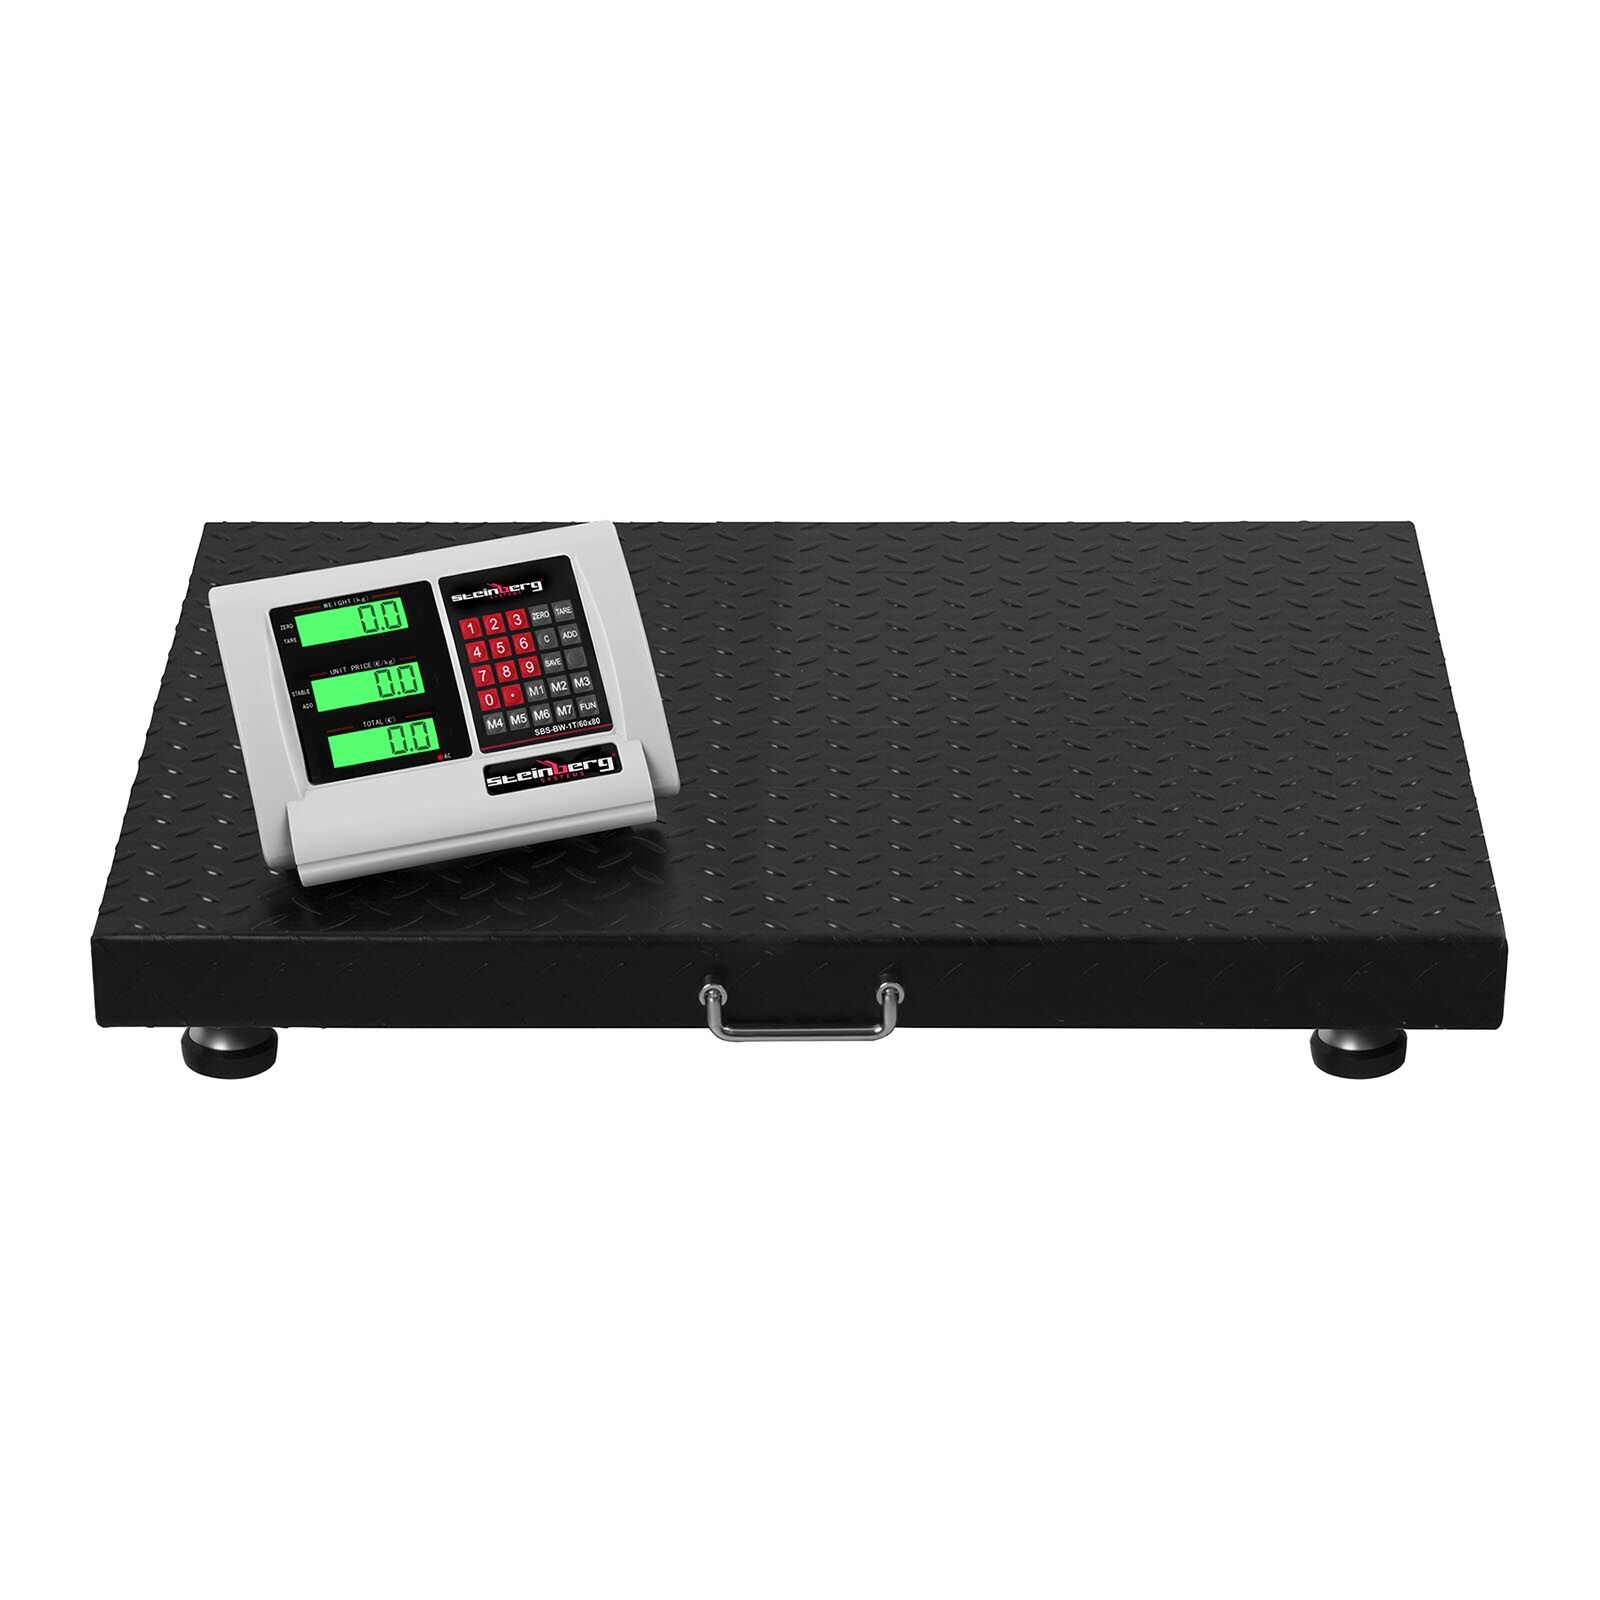 Steinberg Systems Floor Scale - 1 t / 200 g - LCD - wireless SBS-BW-1T/60x80